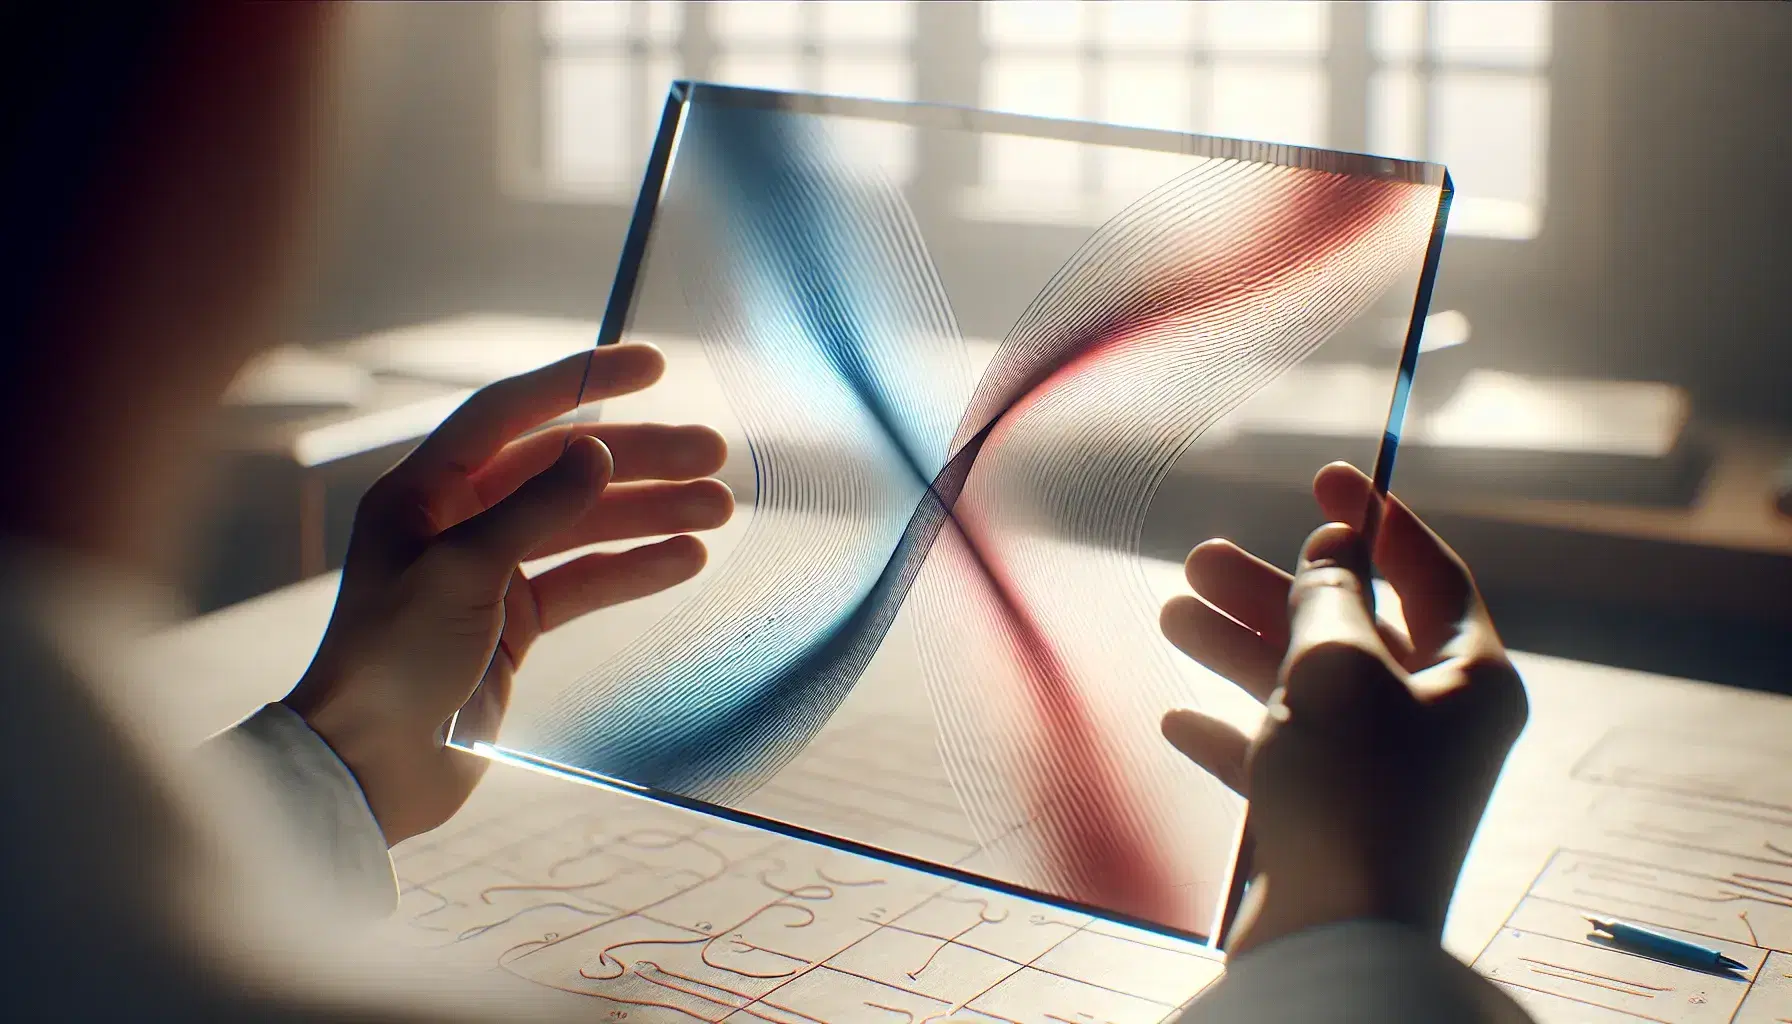 Hands holding a transparent glass board with intertwined blue and red lines, suggesting a creative or scientific concept in a softly lit environment.